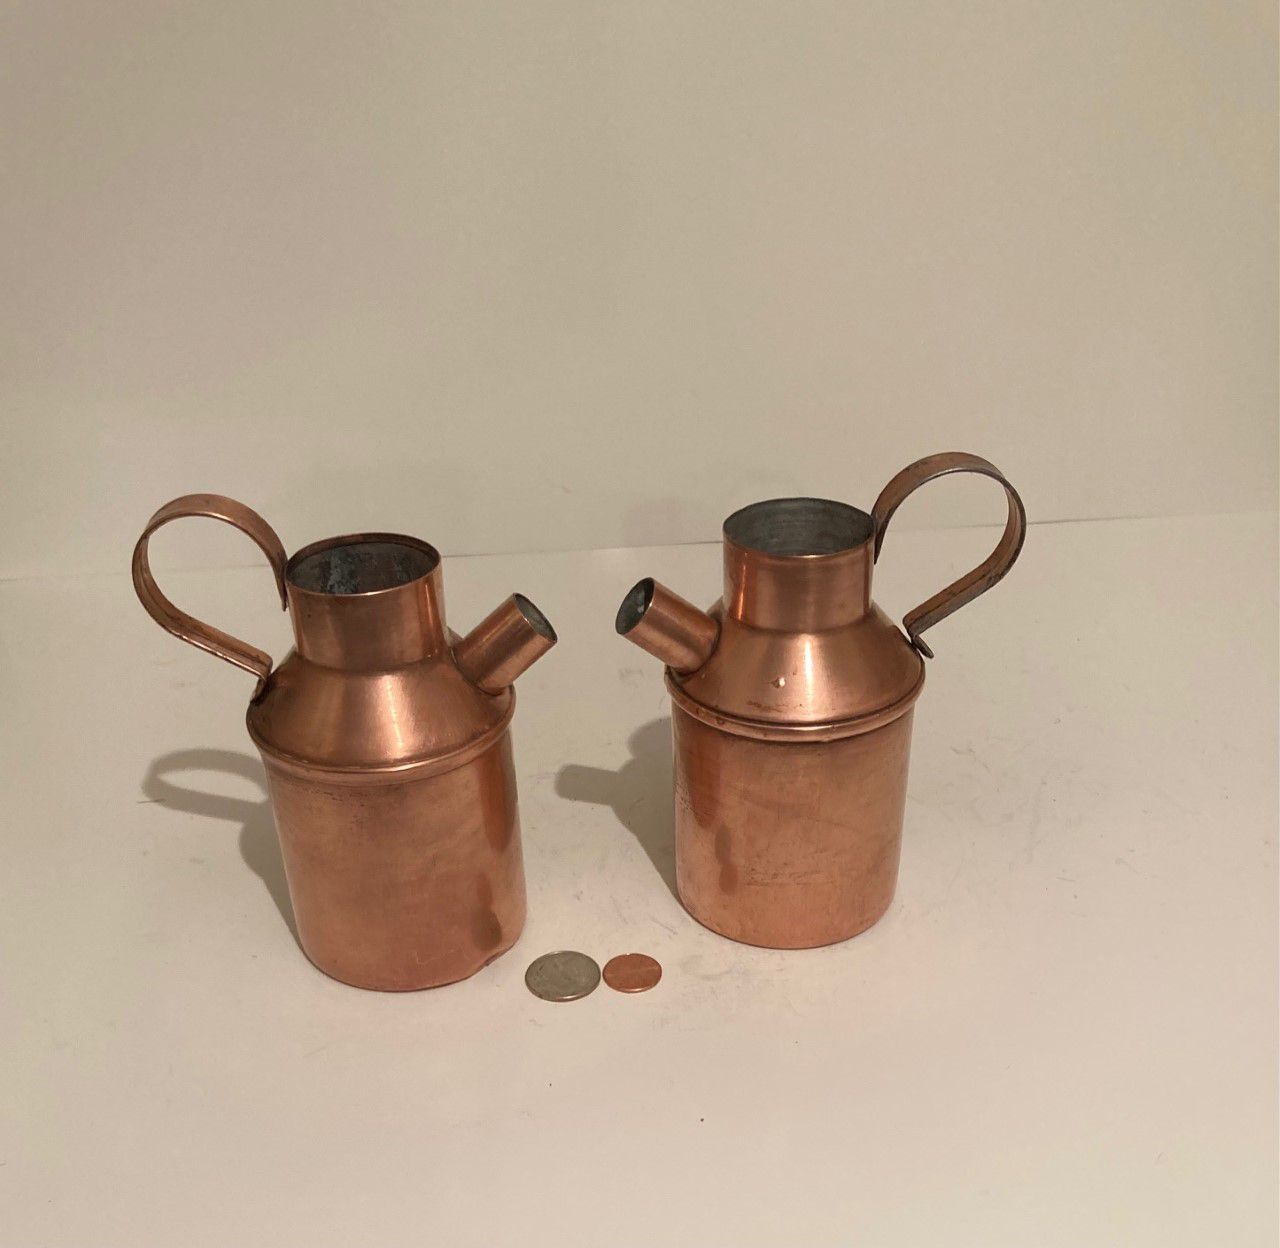 Vintage Set of 2 Metal Copper Pitchers, 6" x 3", Kitchen Decor, Table Display, Shelf Display, These Can Be Shined Up Even More